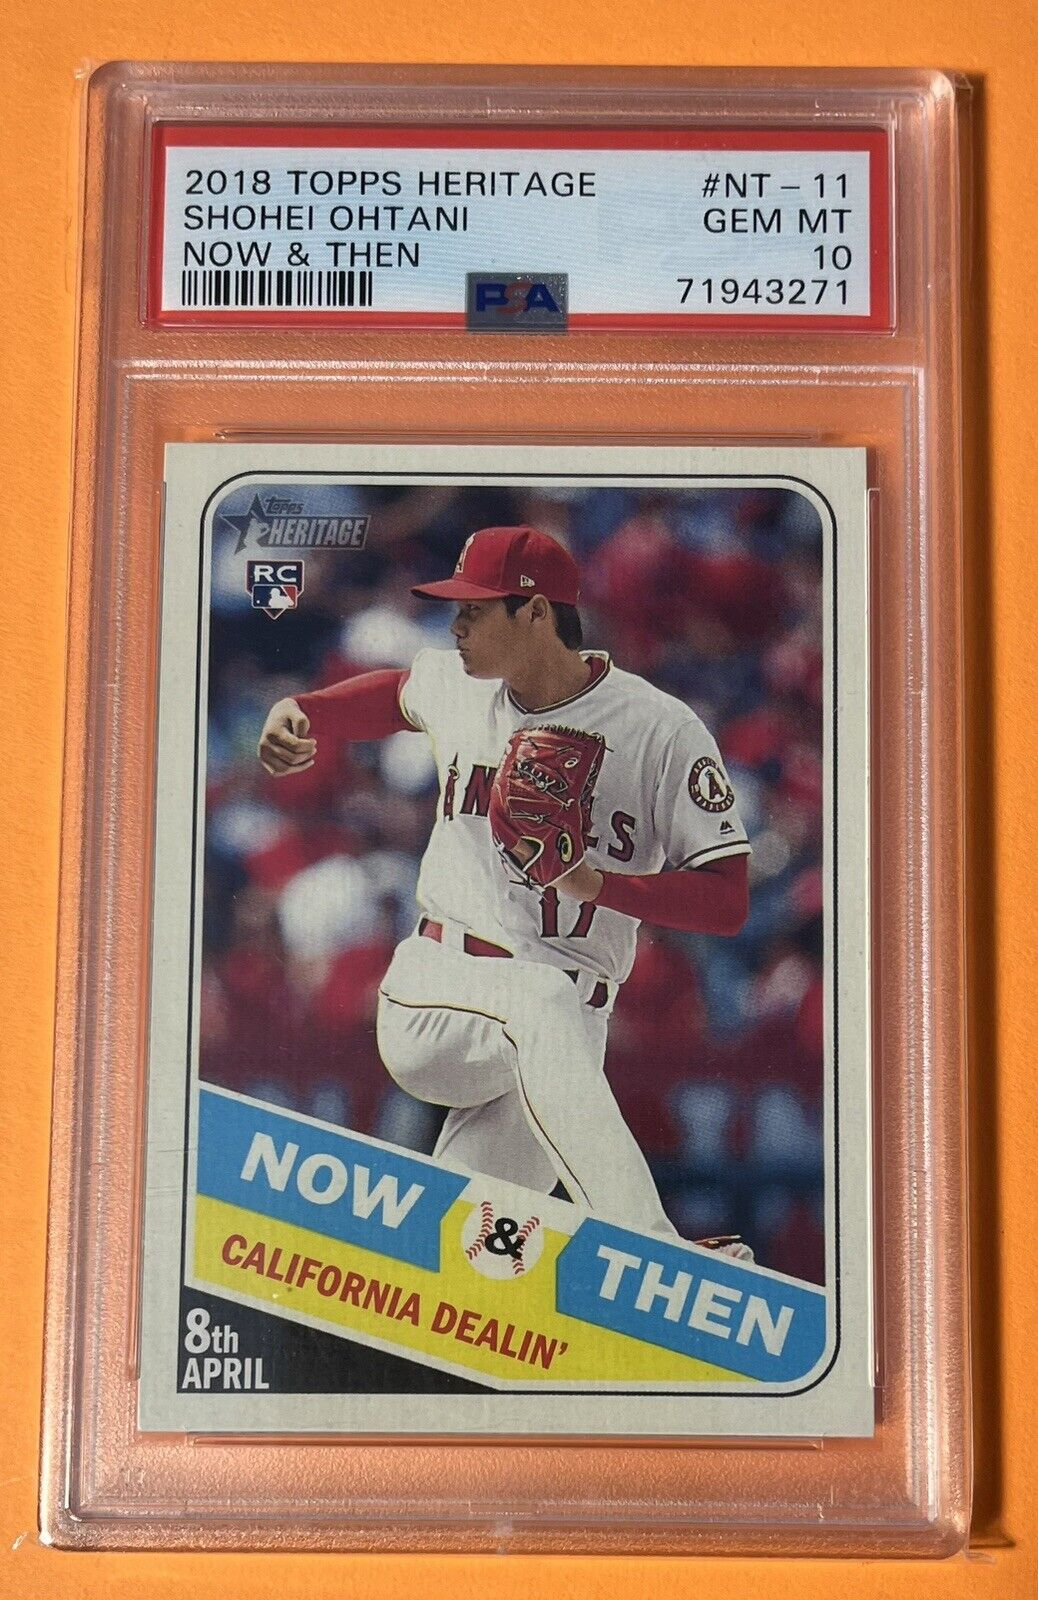 2018 Topps Heritage SHOHEI OHTANI RC PSA 10 Rookie Now & Then Angel 1st HomeWin